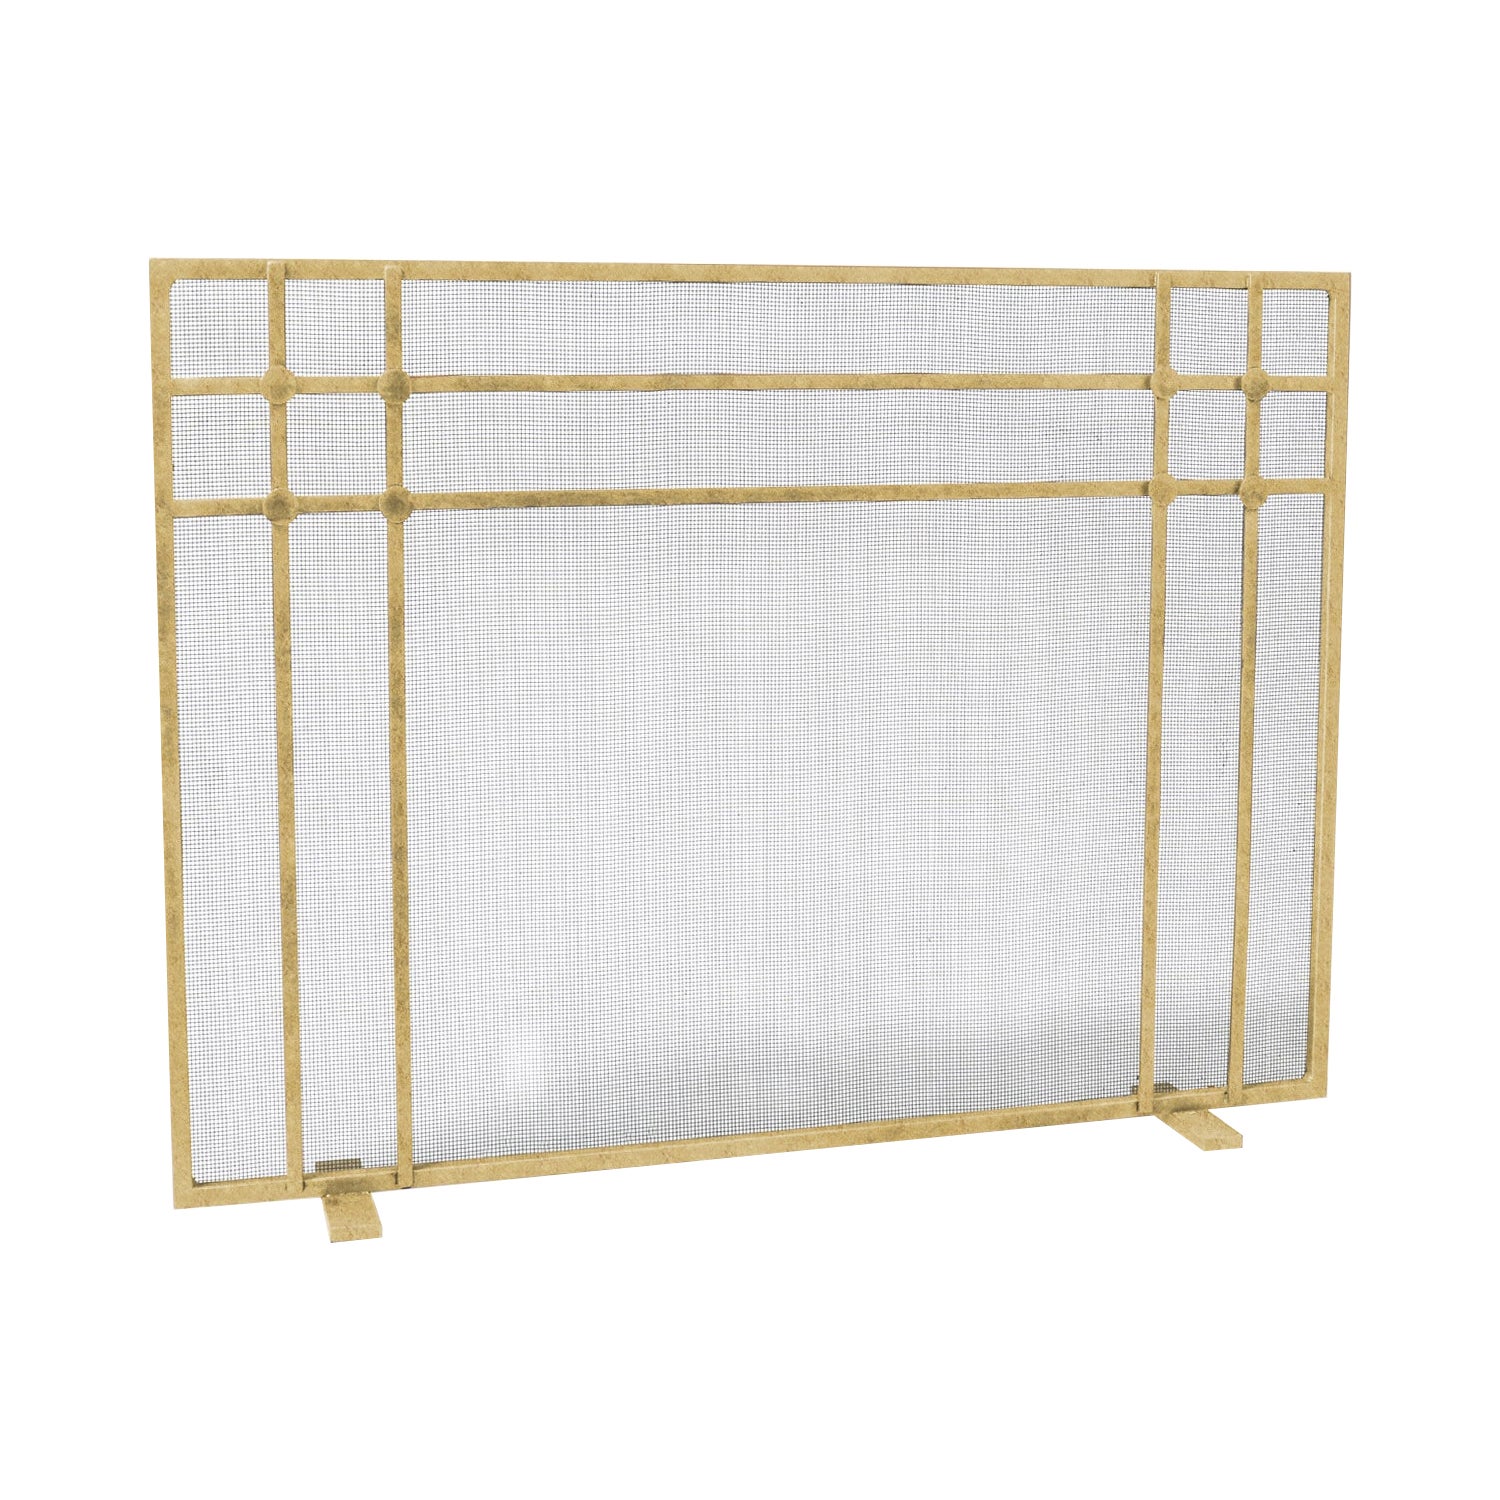 Henry Fireplace Screen in Brilliant Gold For Sale